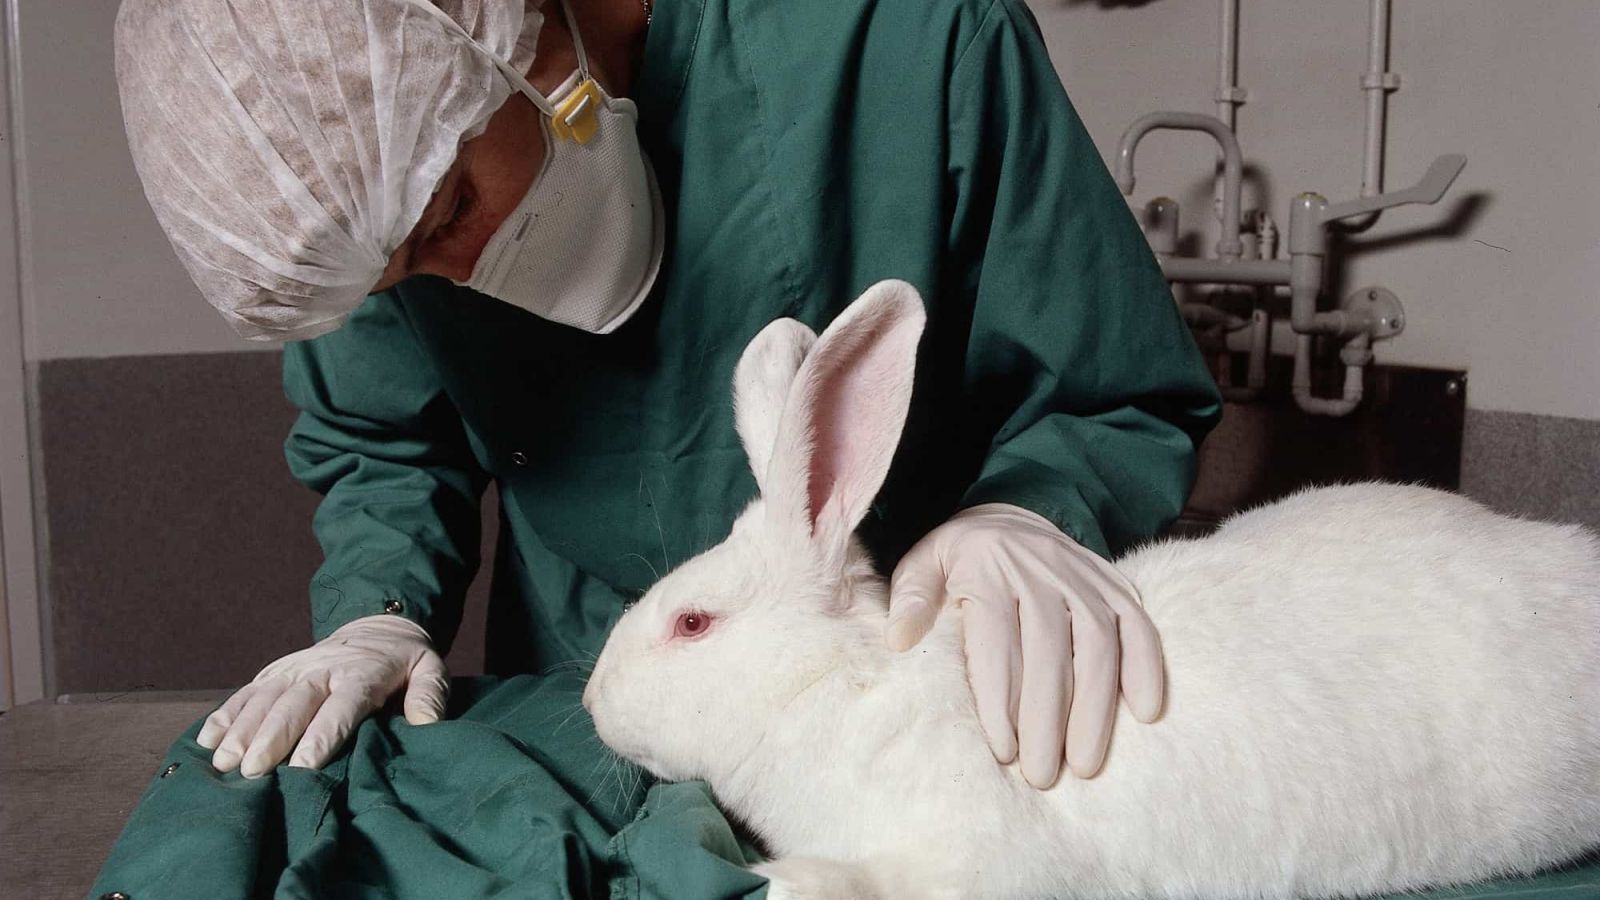 Rabbits in medical research